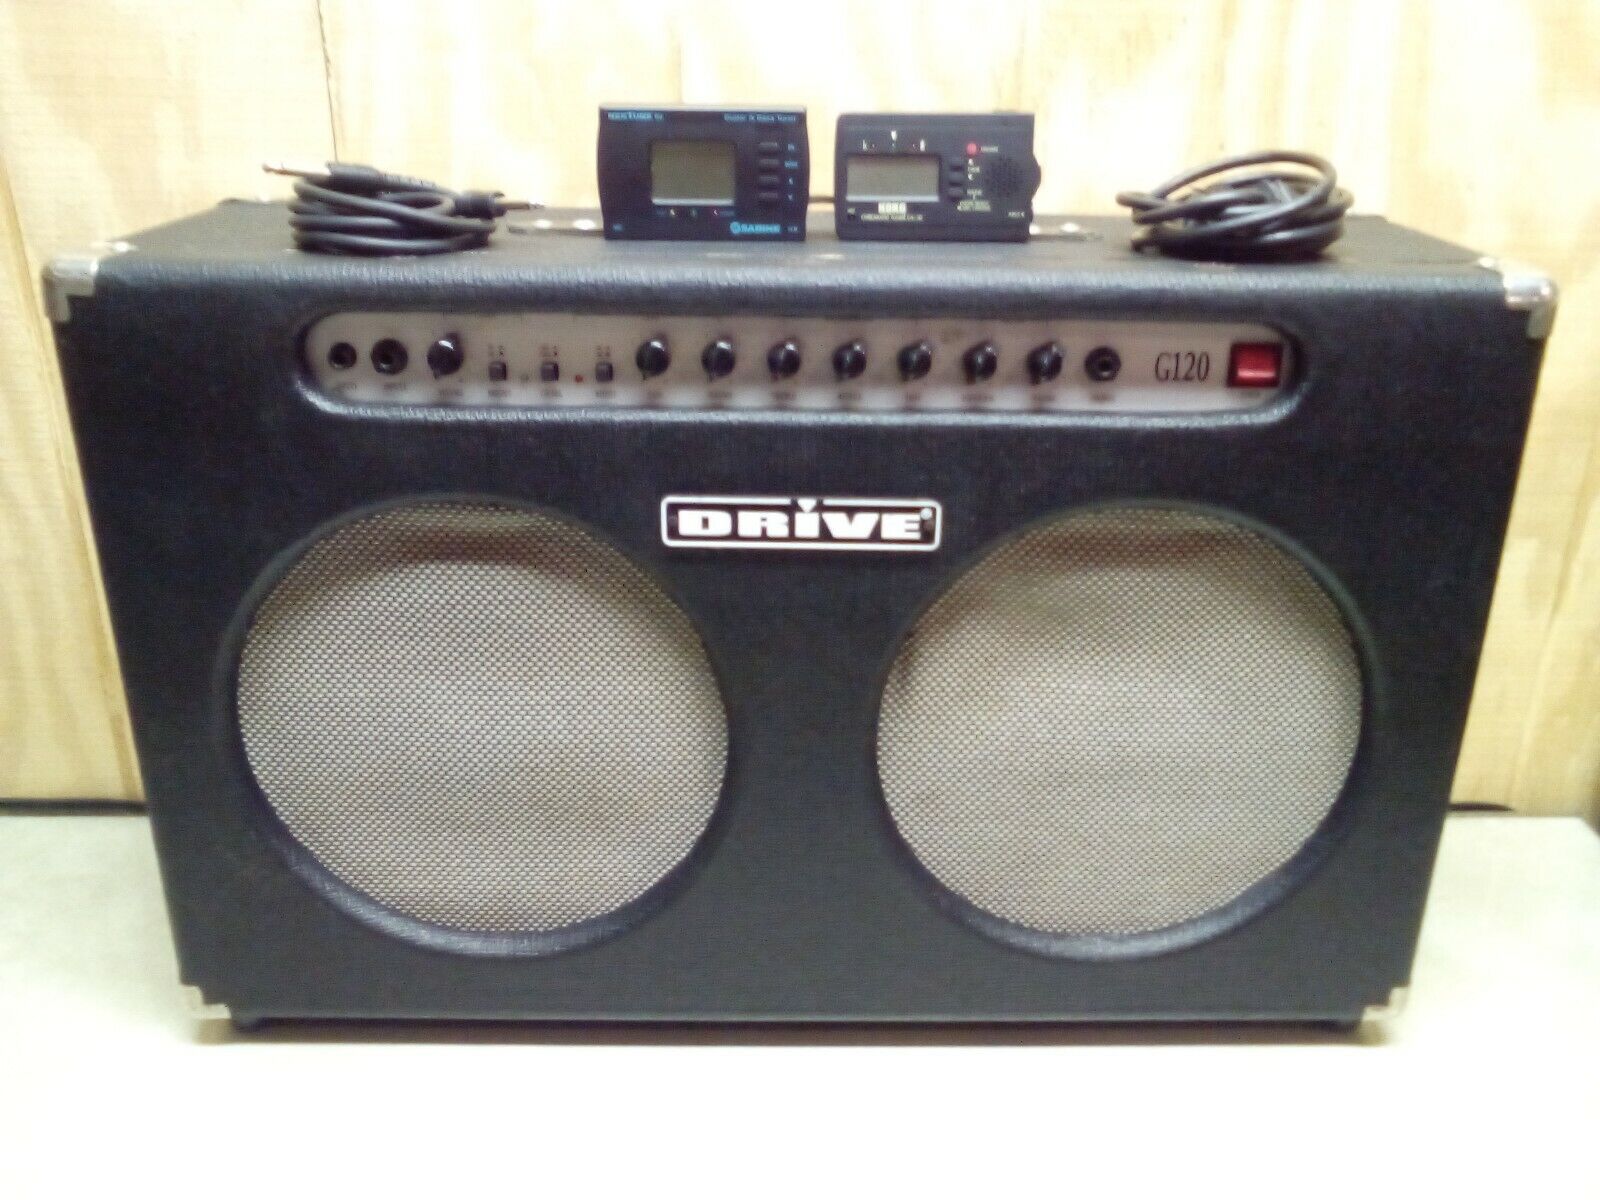 Vintage Drive G120 Black 120V 240W Dual 10" Speakers Guitar Amplifier w/Extras  Drive Does Not Apply